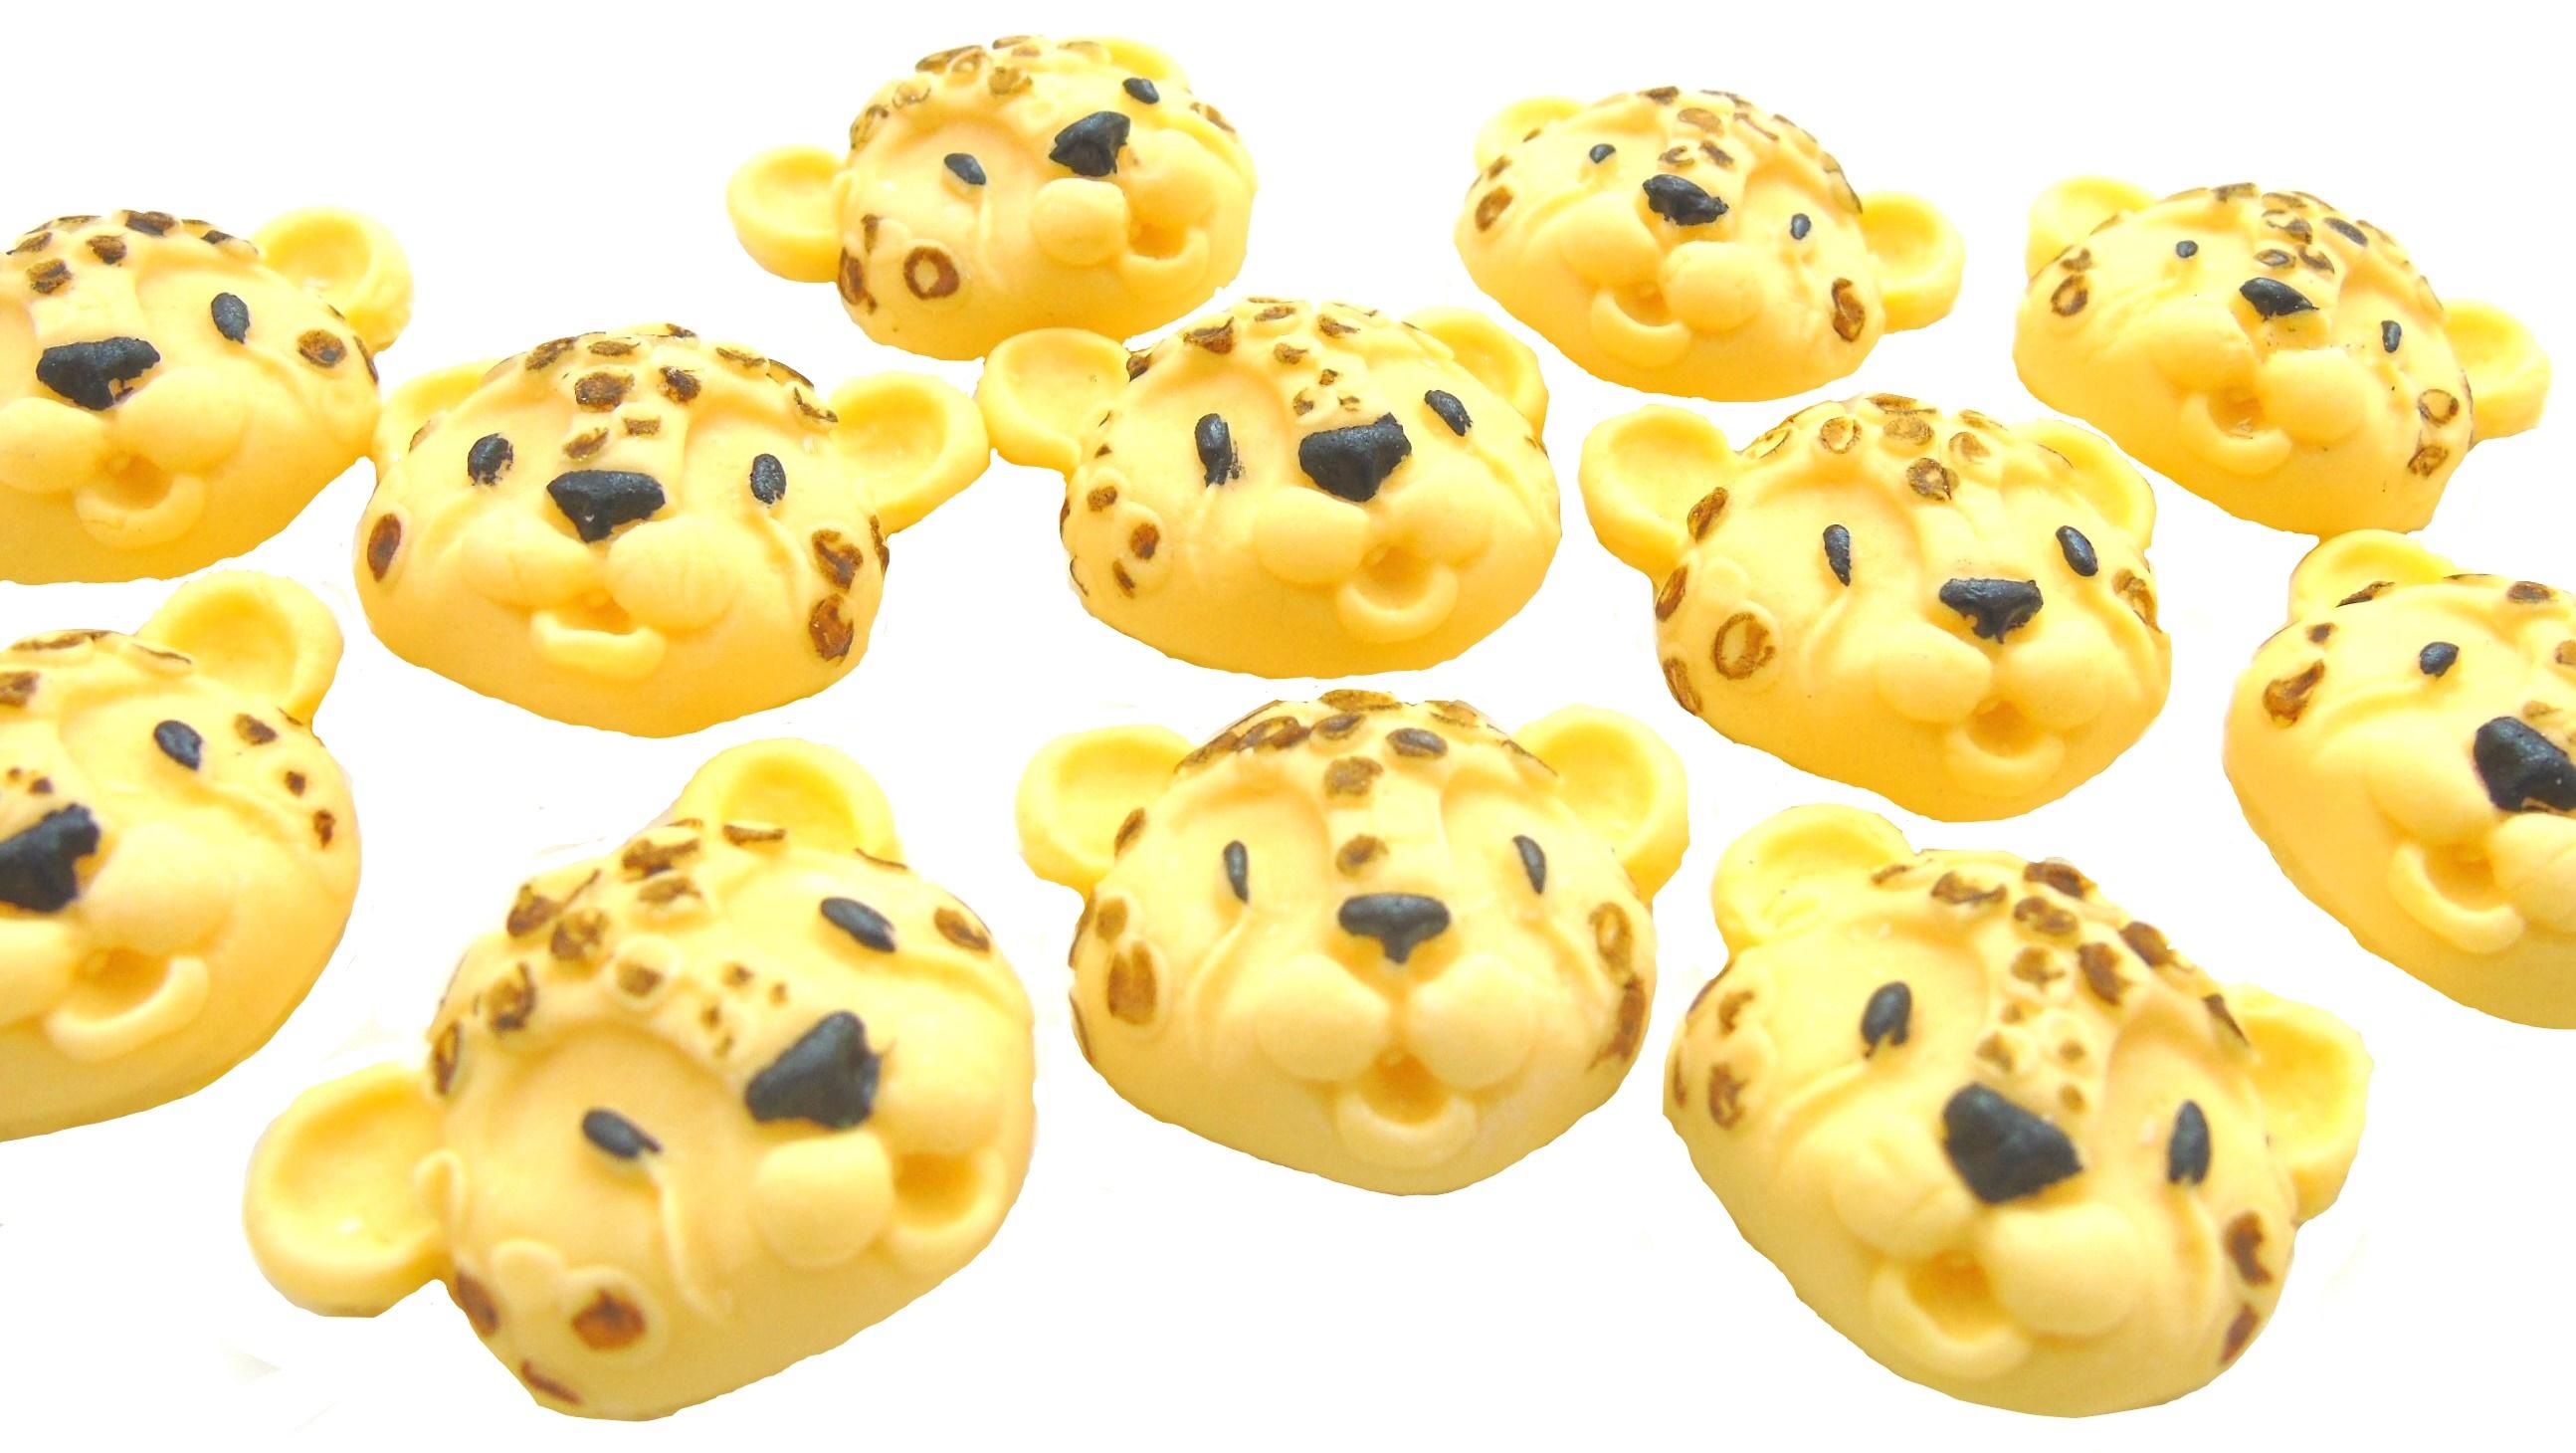 Leopard Faces Ideal Birthday or Baby Shower Vegan Cupcake Toppers